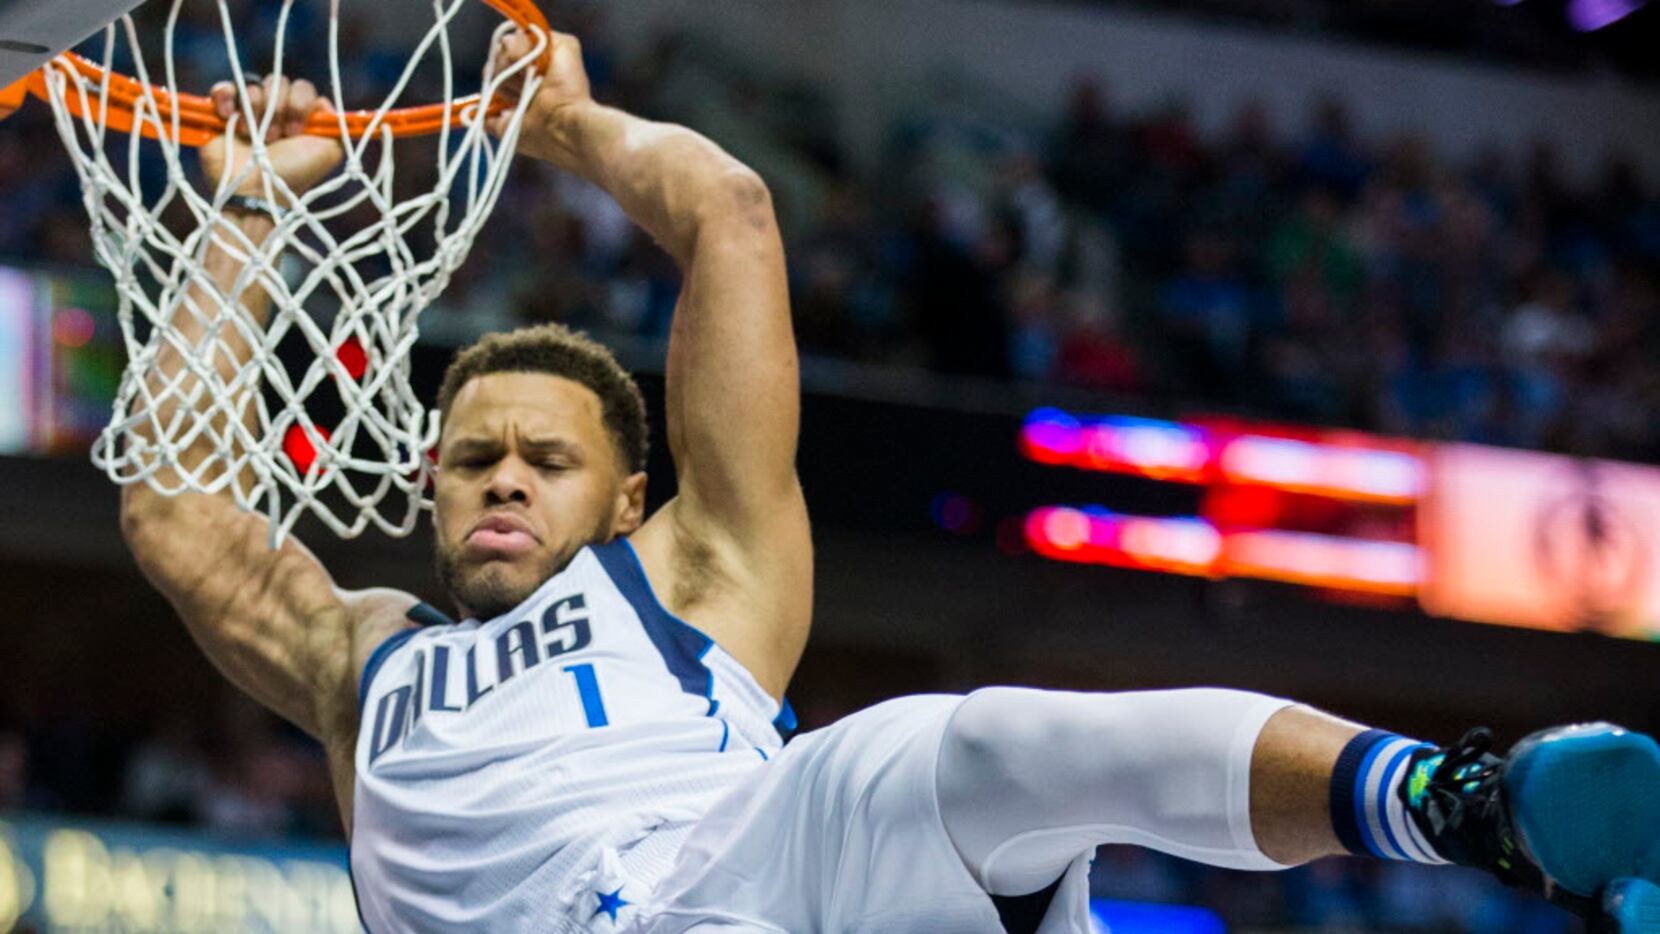 Dallas Mavericks guard Justin Anderson (1) hangs on the rim after dunking the ball during...